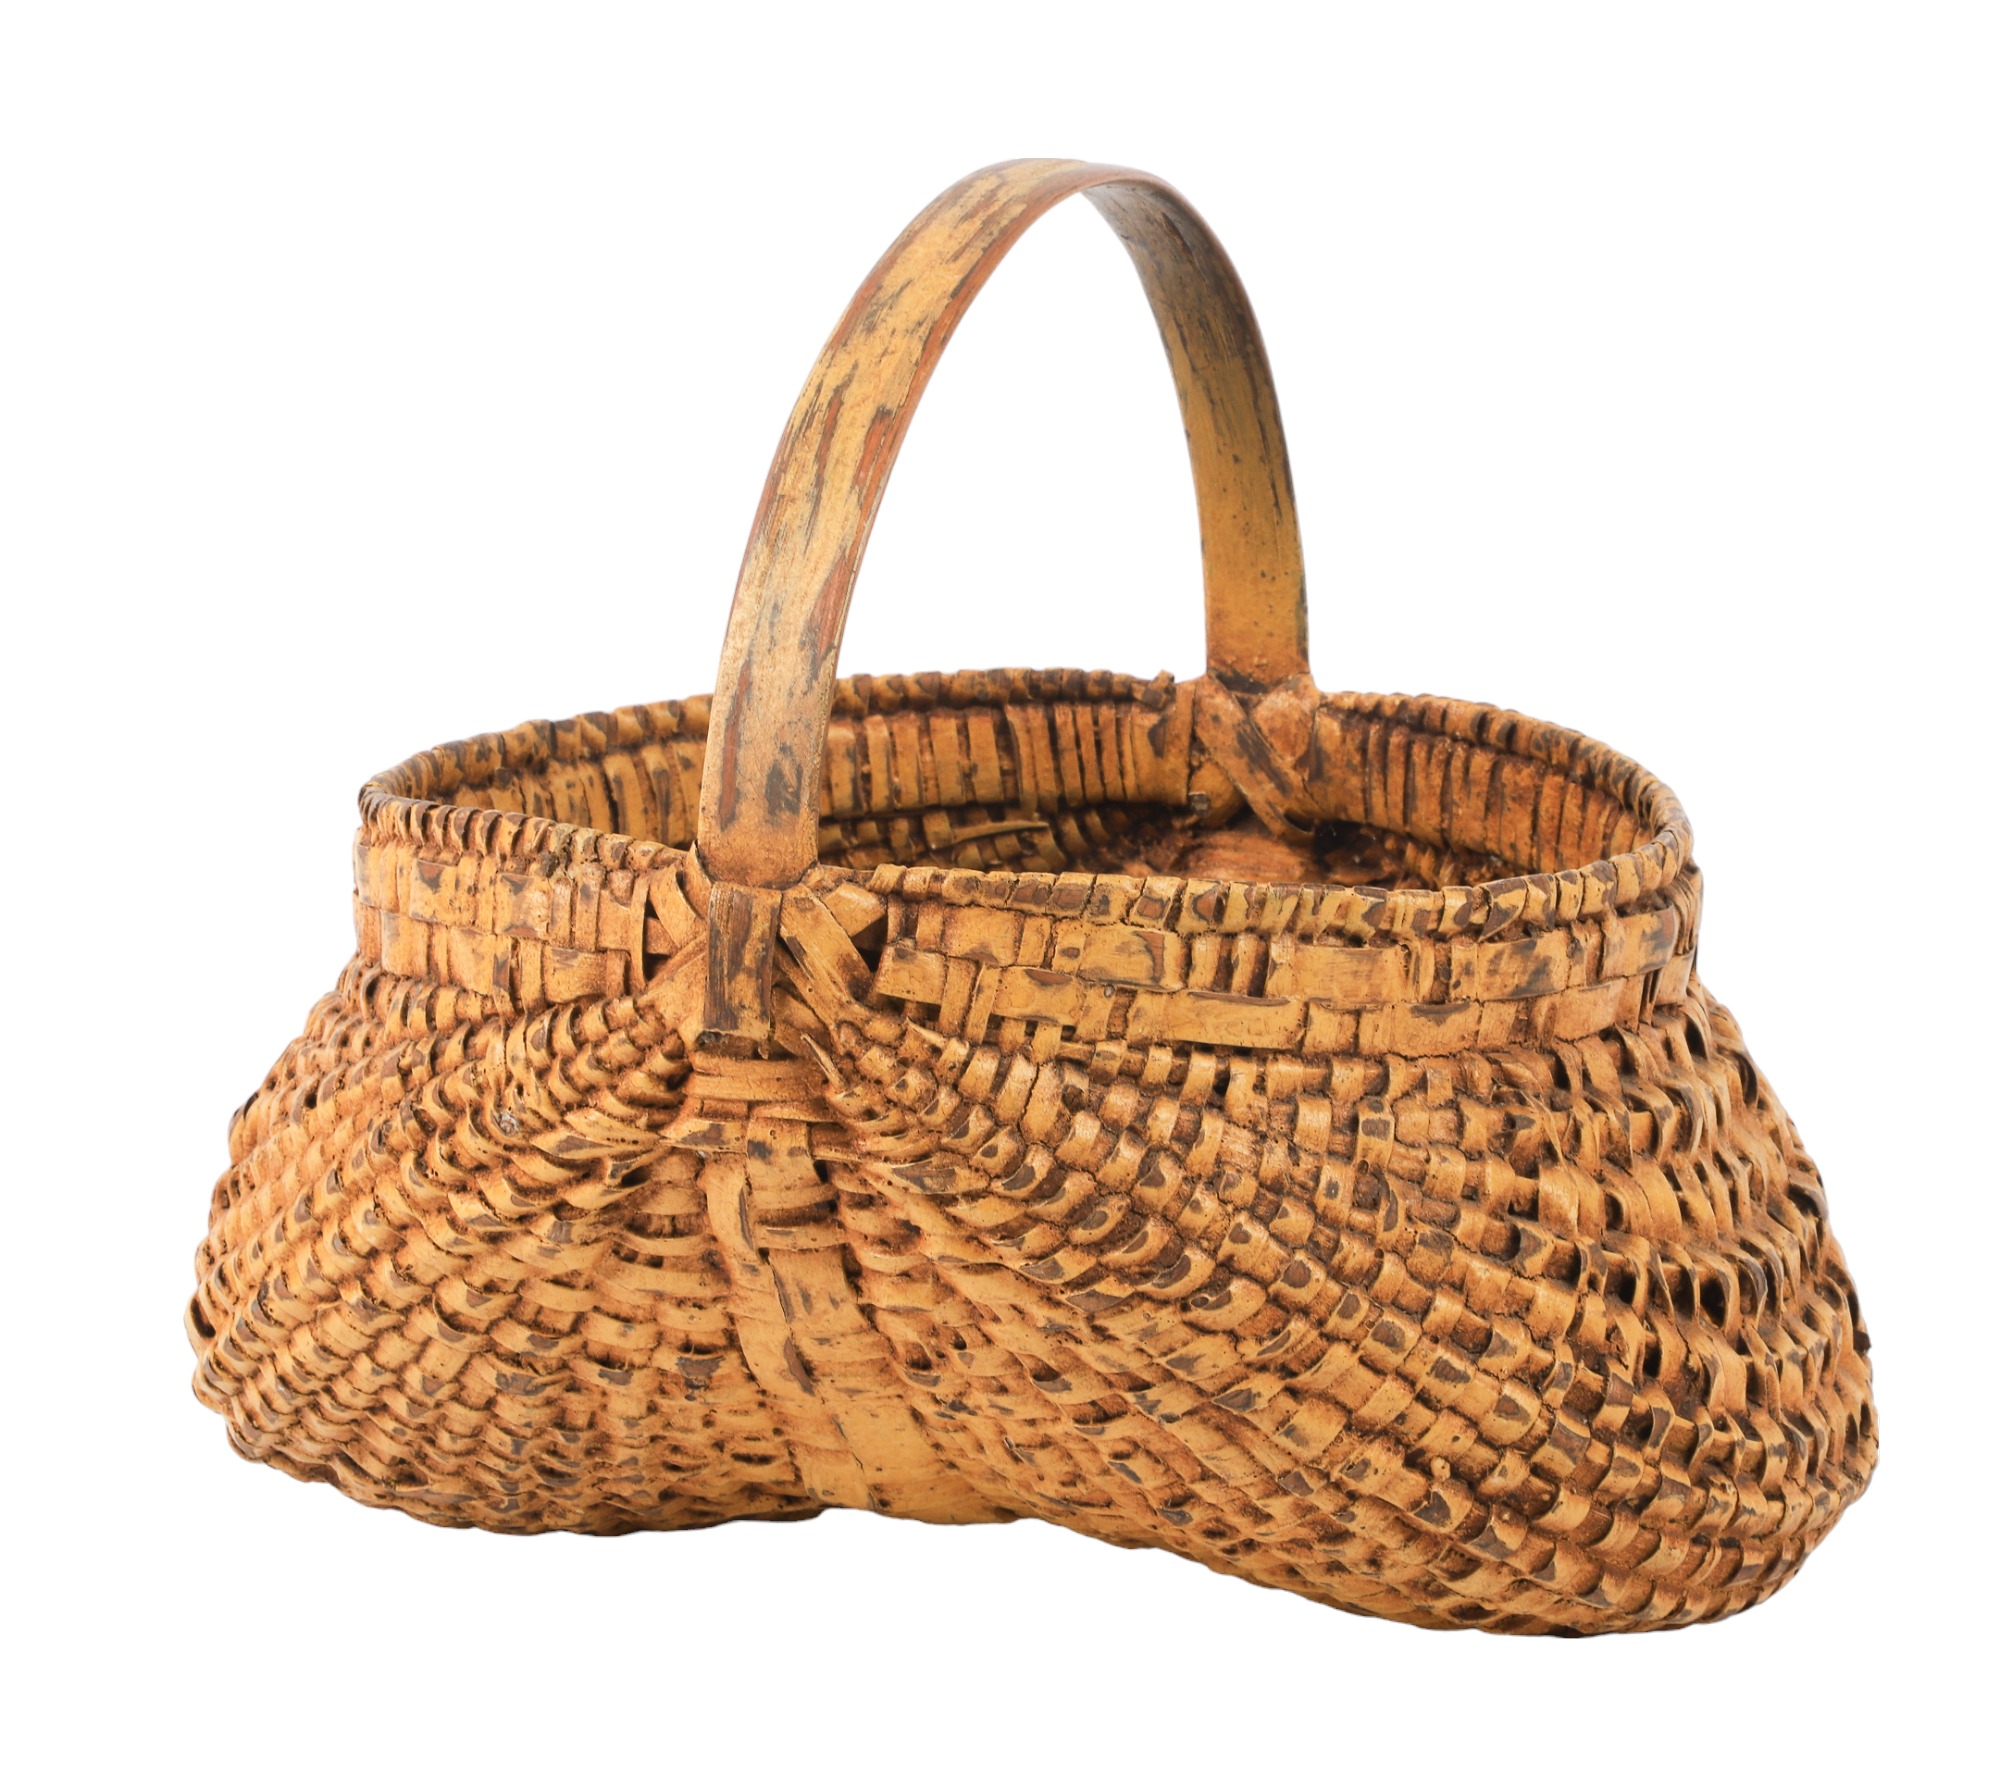 Tightly Woven Double Buttocks Basket  3ca51f